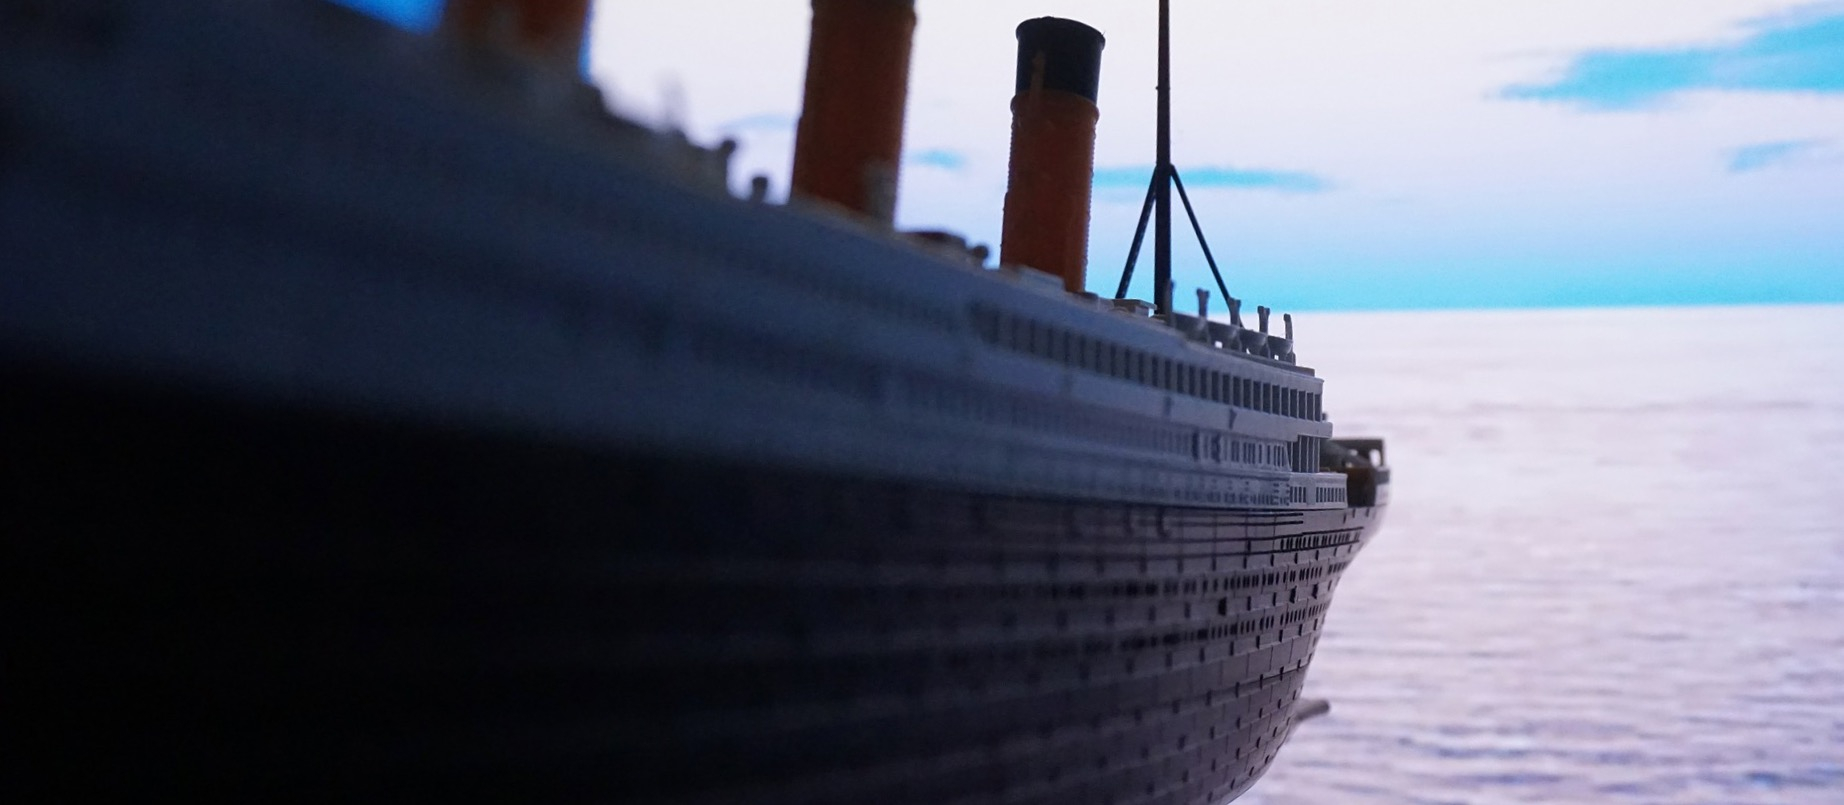 The head baker of the Titanic spent two hours in frigid water and emerged  with only swollen feet! | Office for Science and Society - McGill University